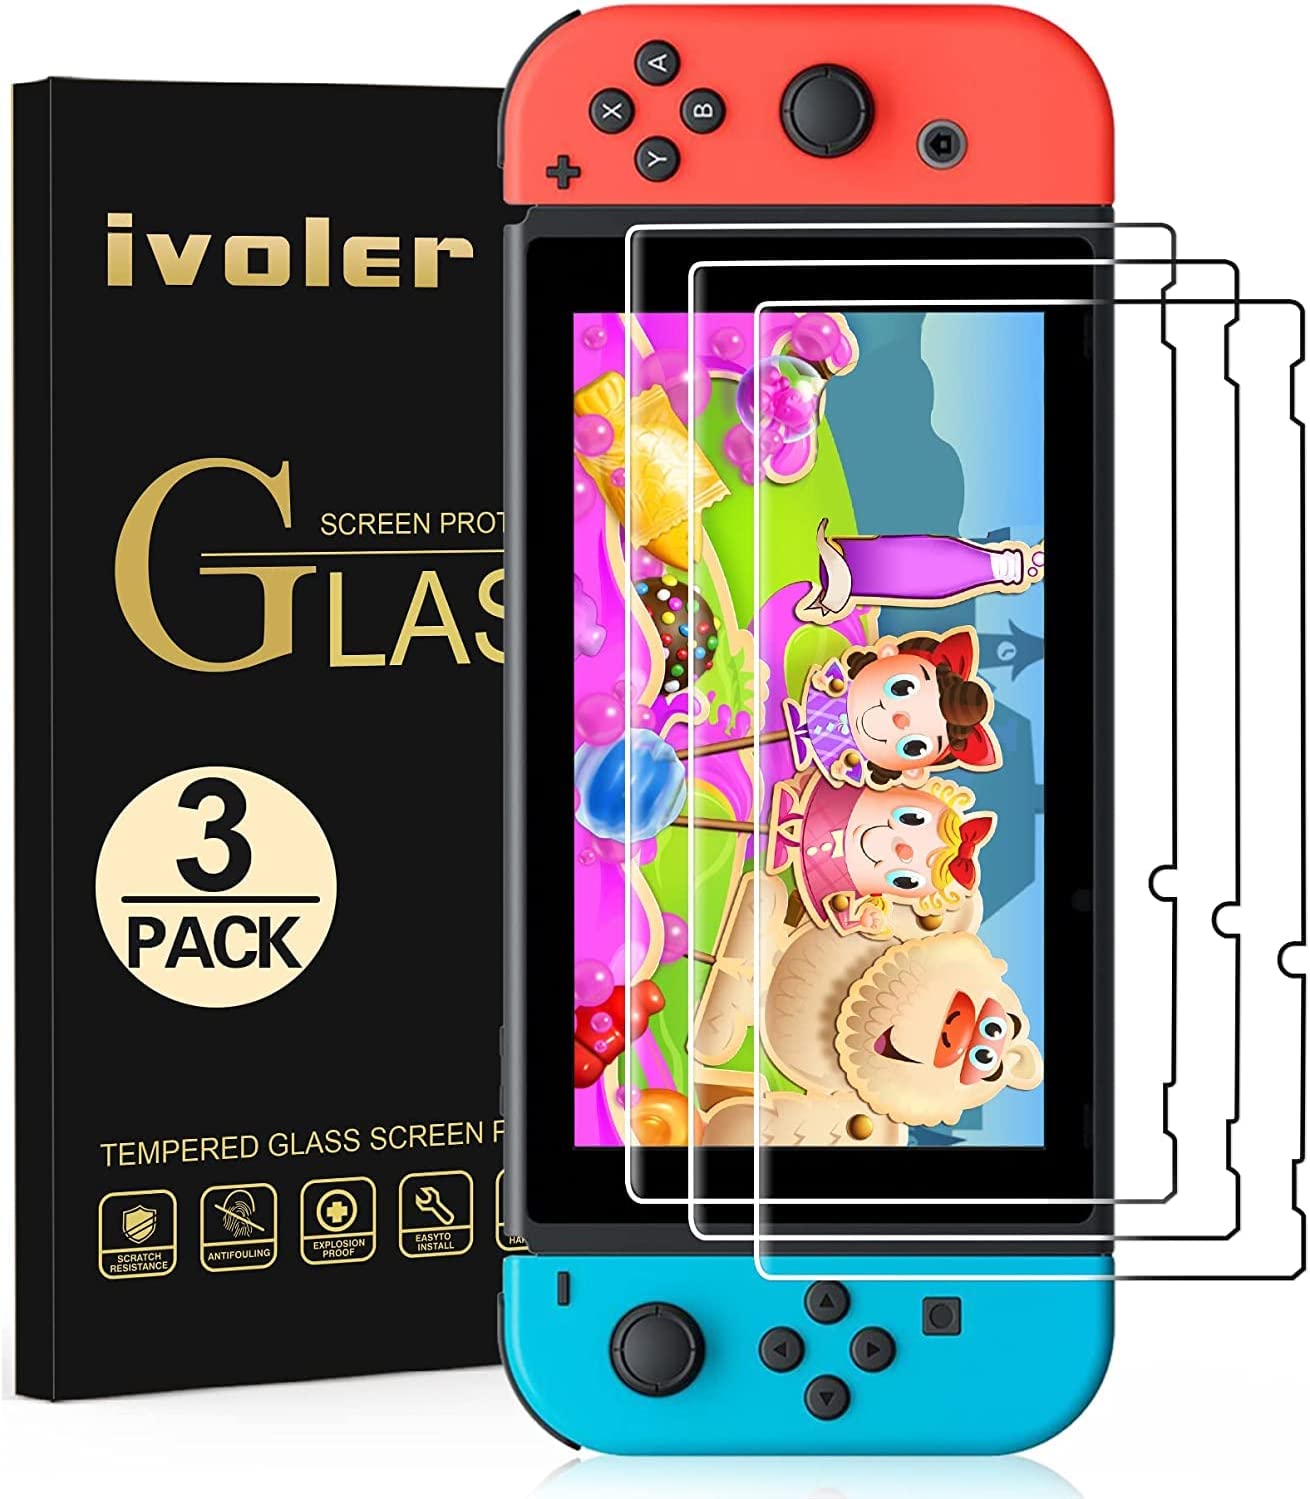 iVoler Tempered Glass screen protector for Nintendo Switch.